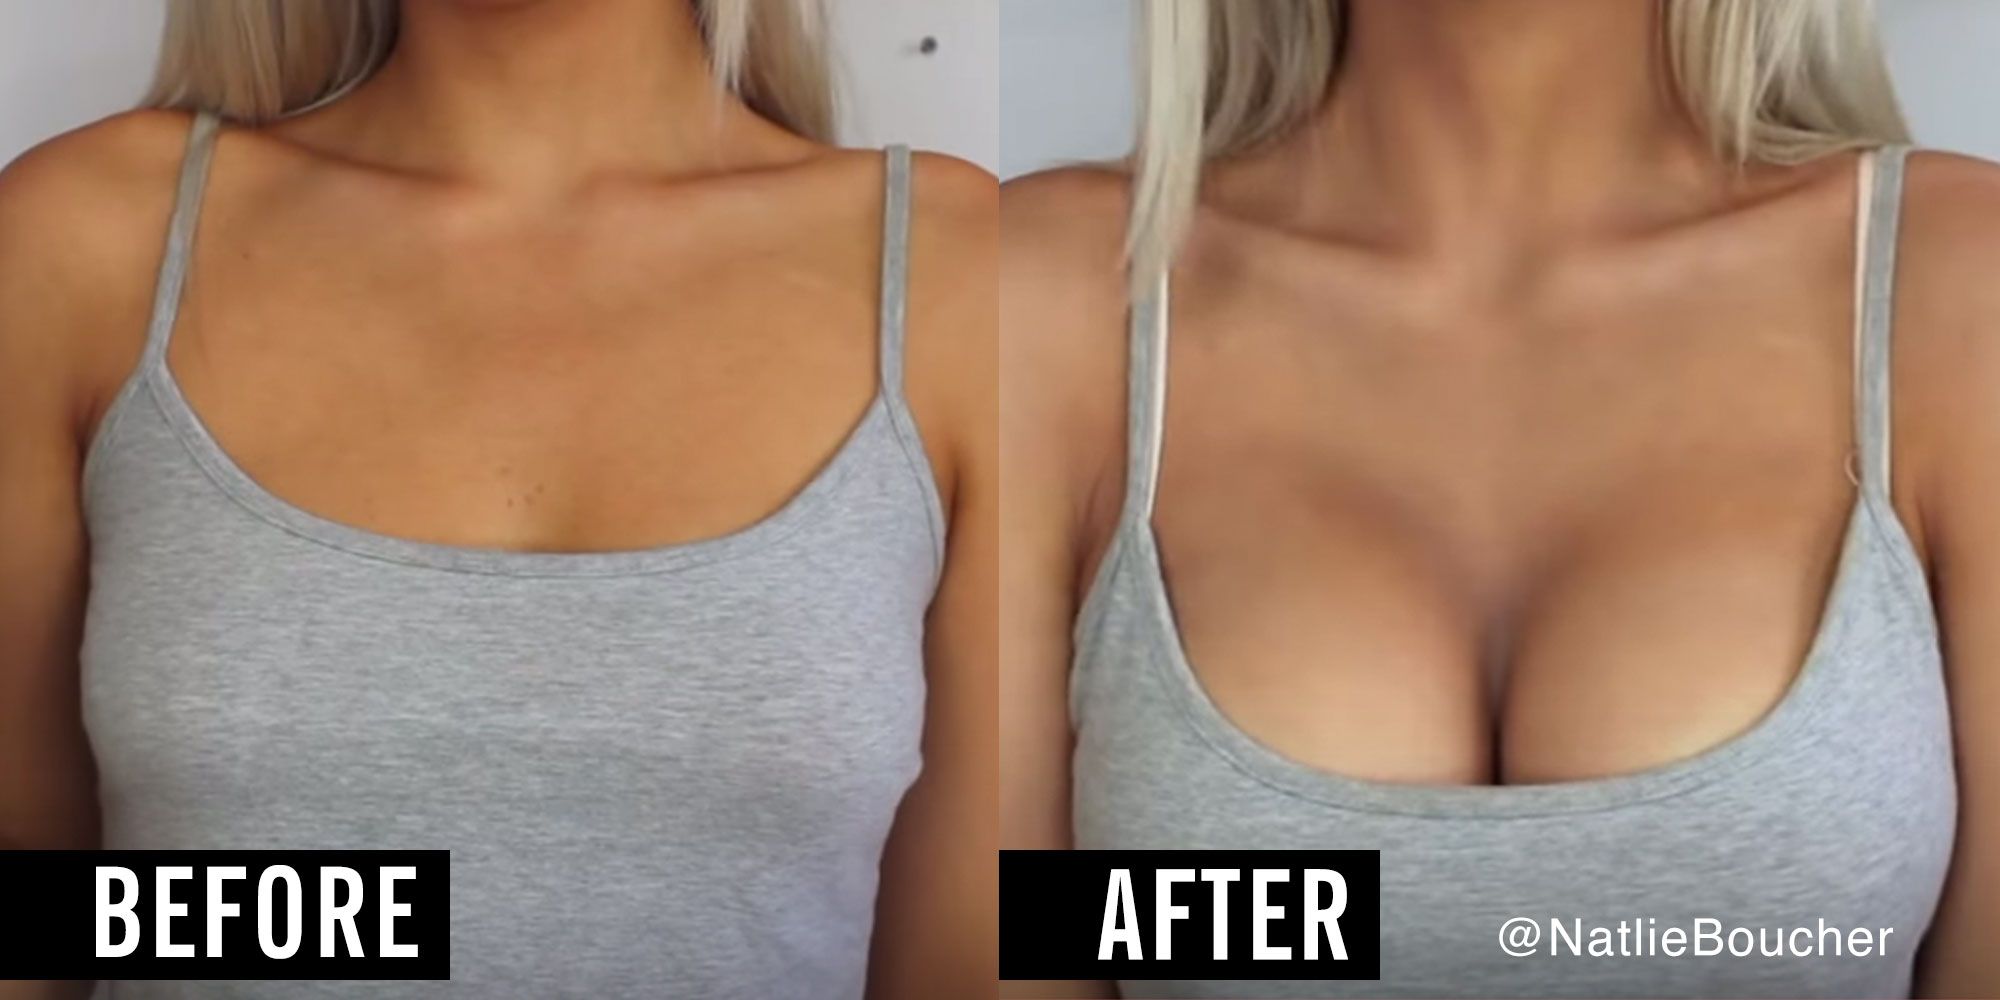 I Contour My Boobs and Love It: Here's How to Increase Your Cleavage